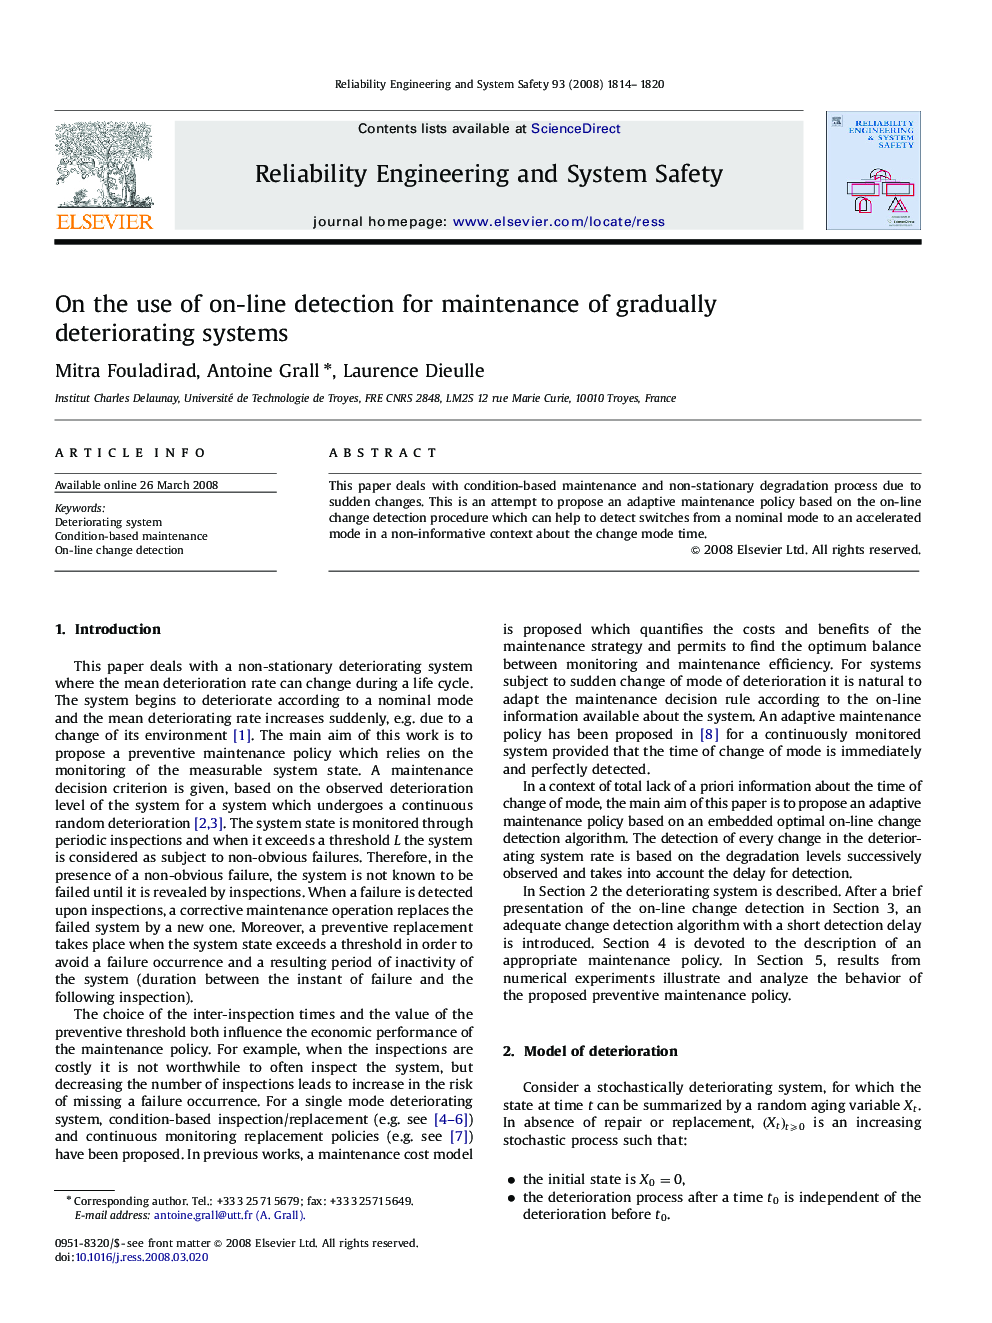 On the use of on-line detection for maintenance of gradually deteriorating systems